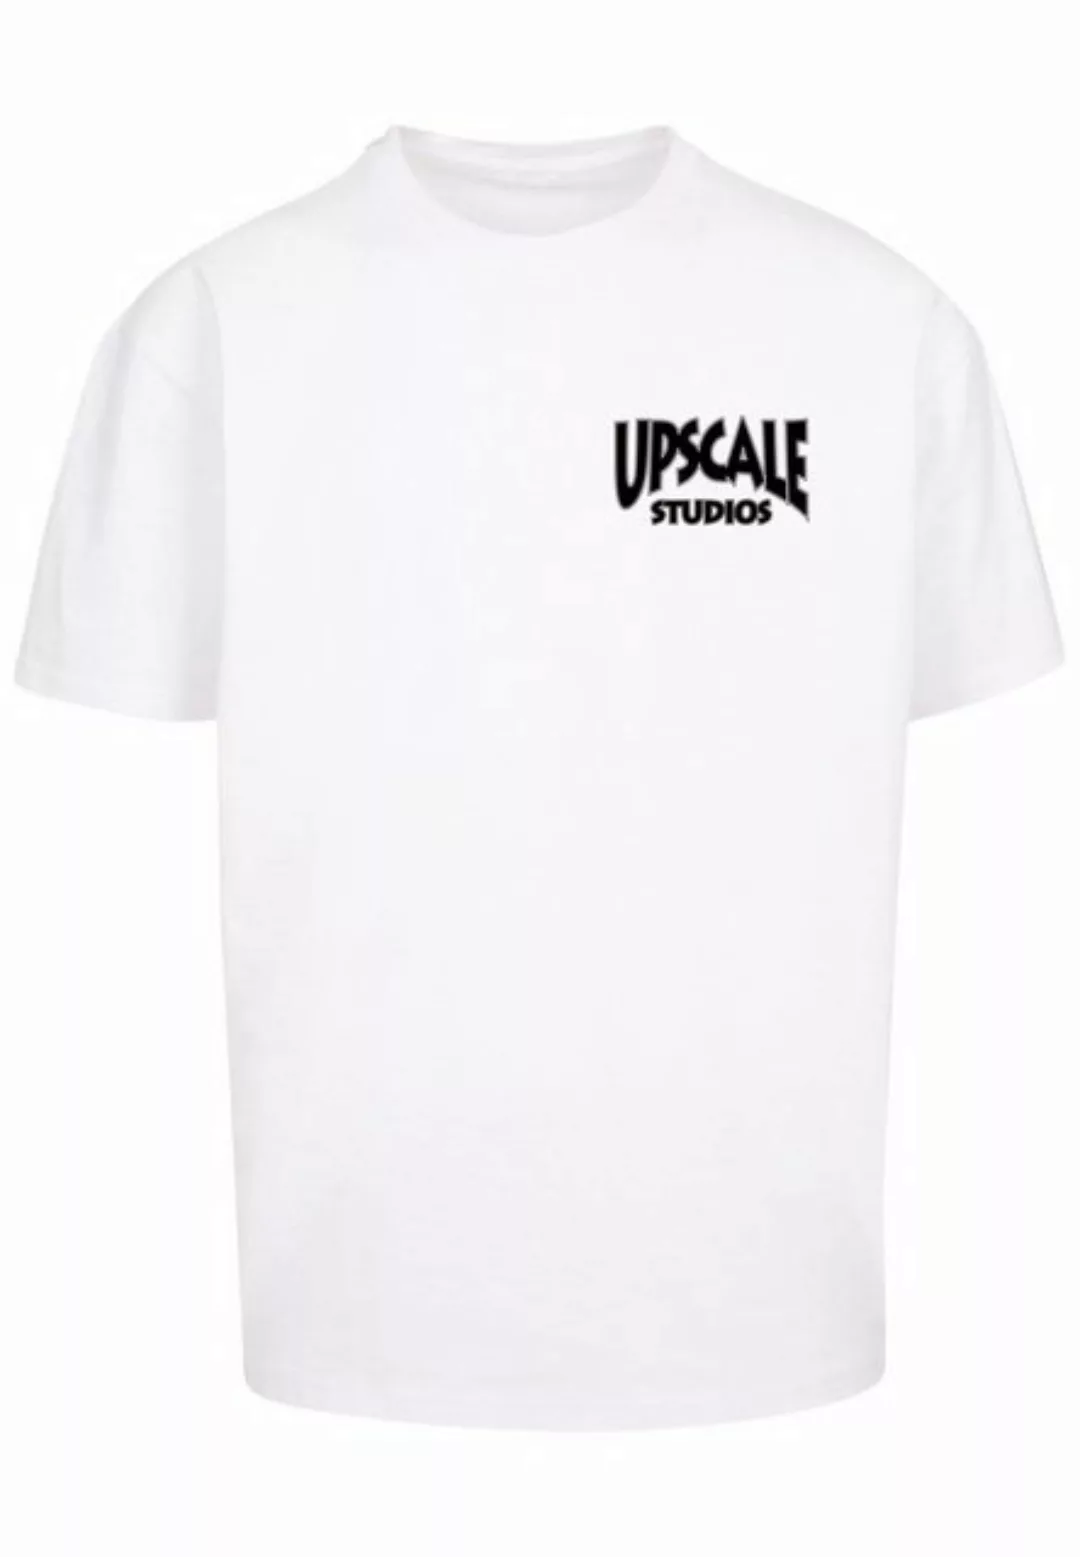 Upscale by Mister Tee T-Shirt Upscale by Mister Tee Unisex Upscale Studios günstig online kaufen